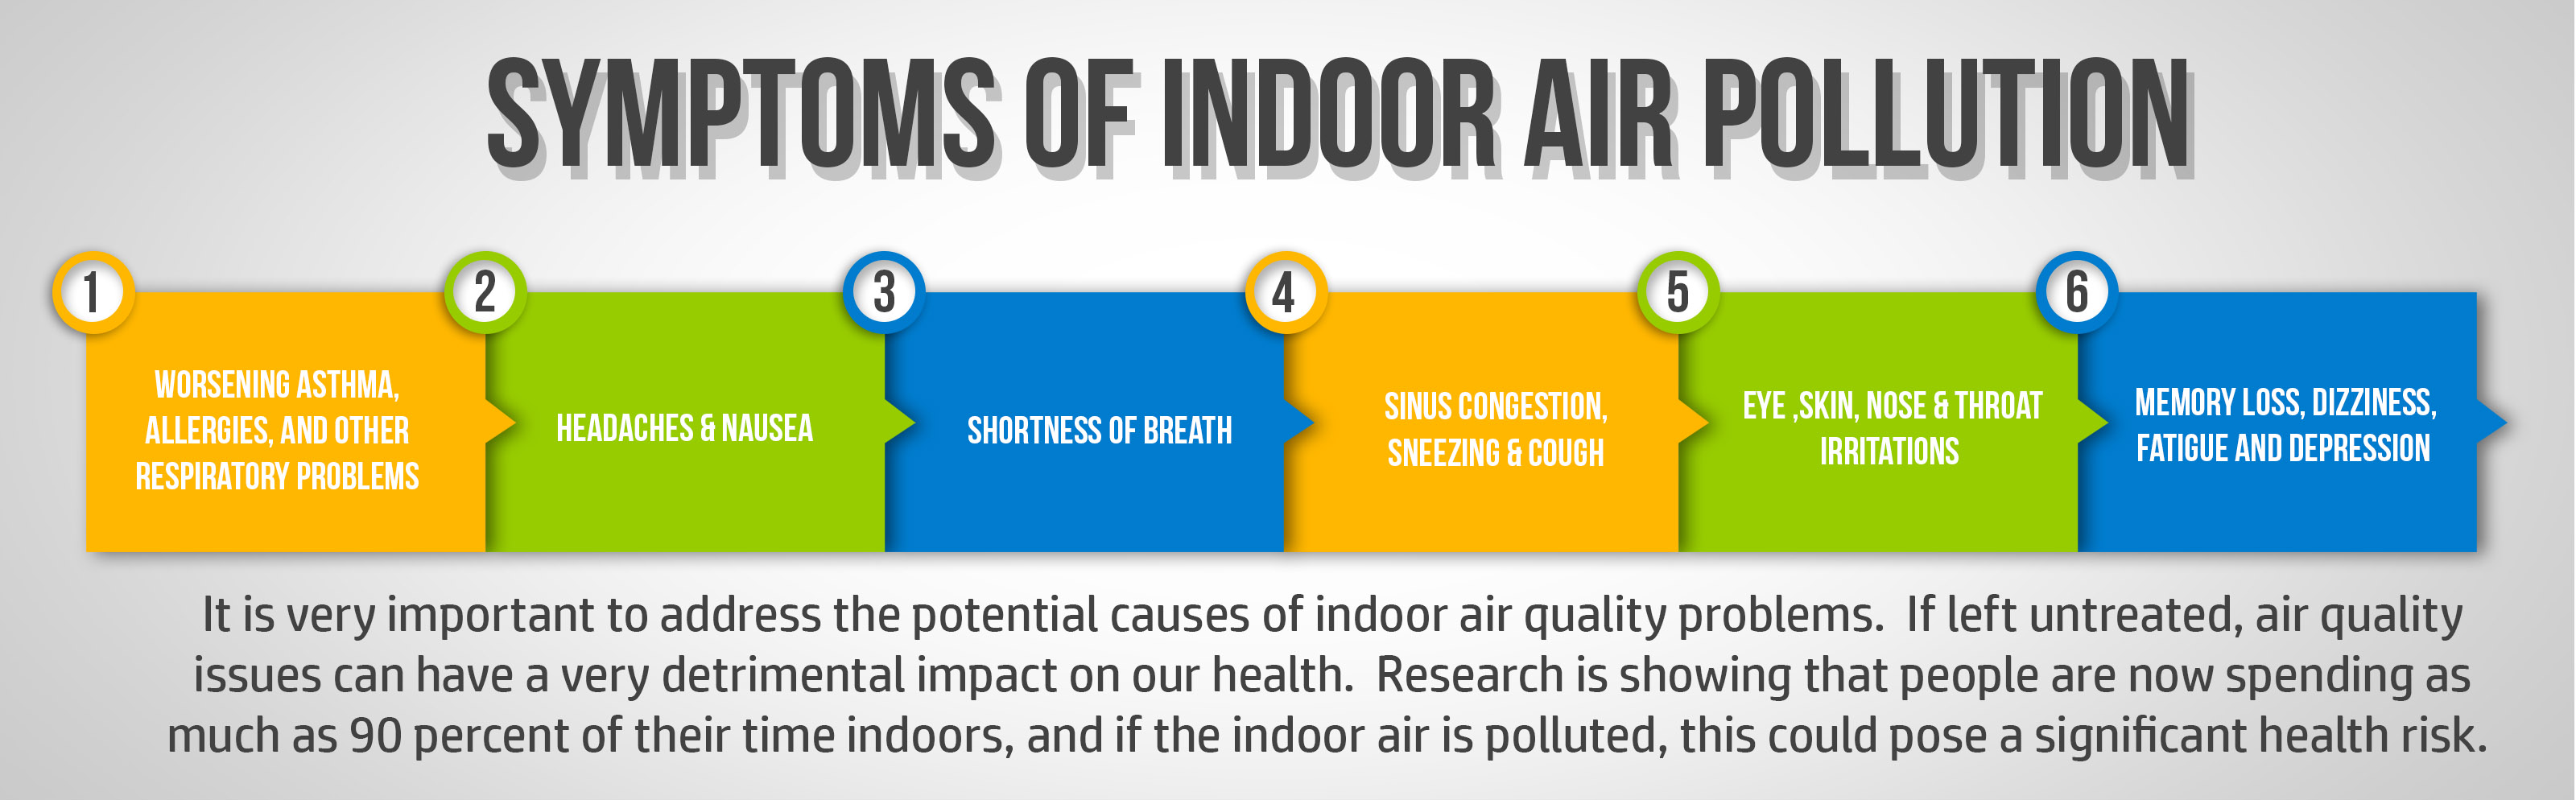 Fundamentals of Indoor Air Quality in Buildings